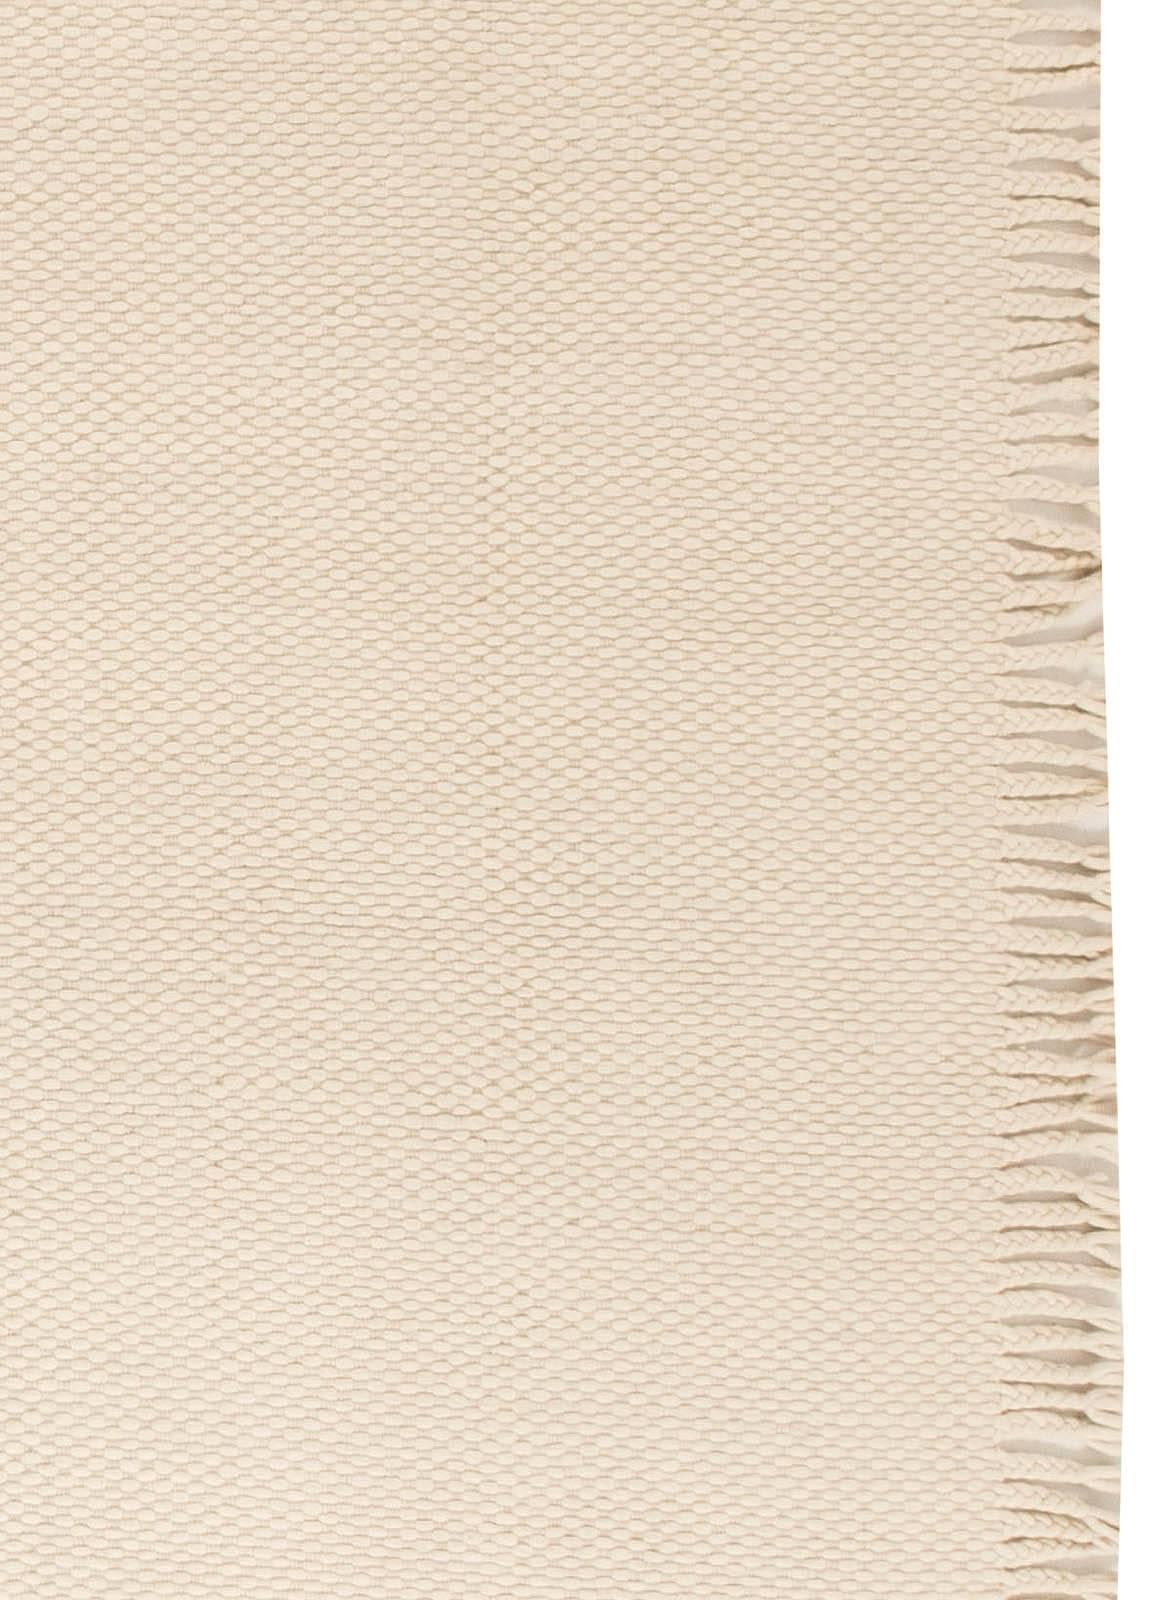 Wool One-of-a-kind Contemporary Beige Flat-Weave Rug by Doris Leslie Blau For Sale